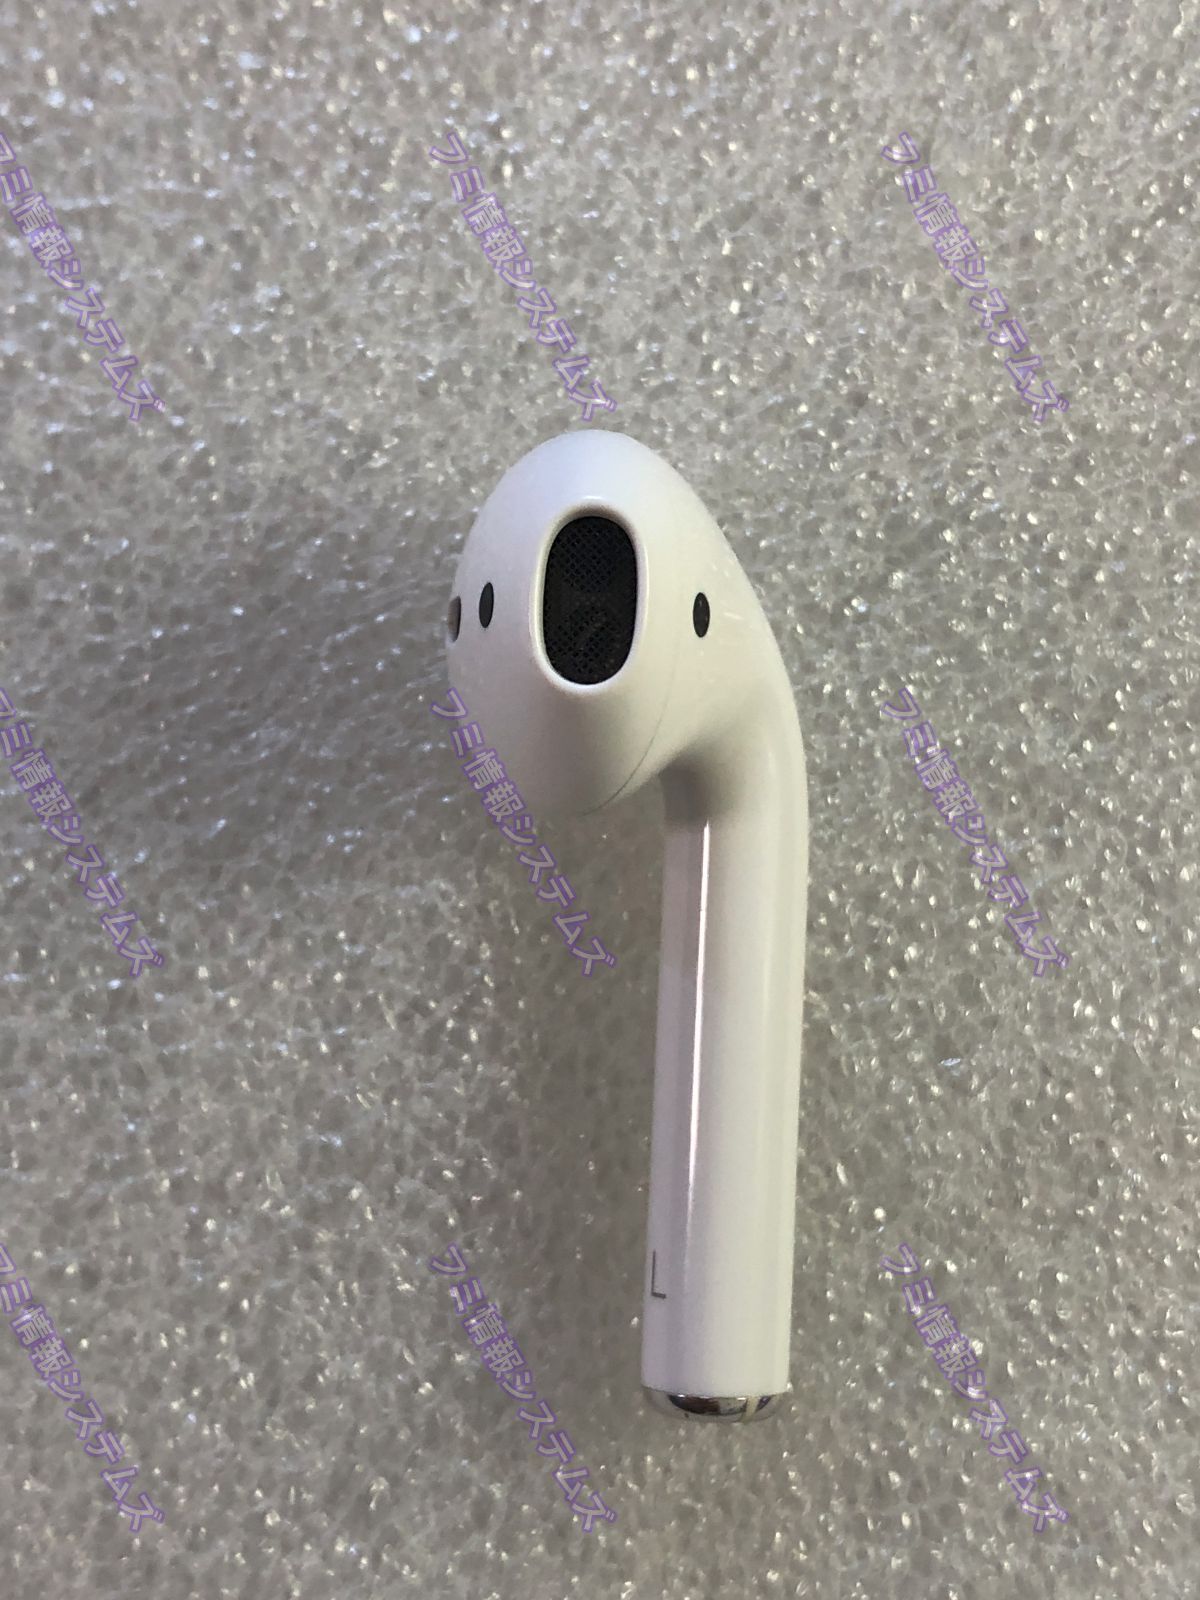 AirPods A2031 第二世代　左耳　ケース付き